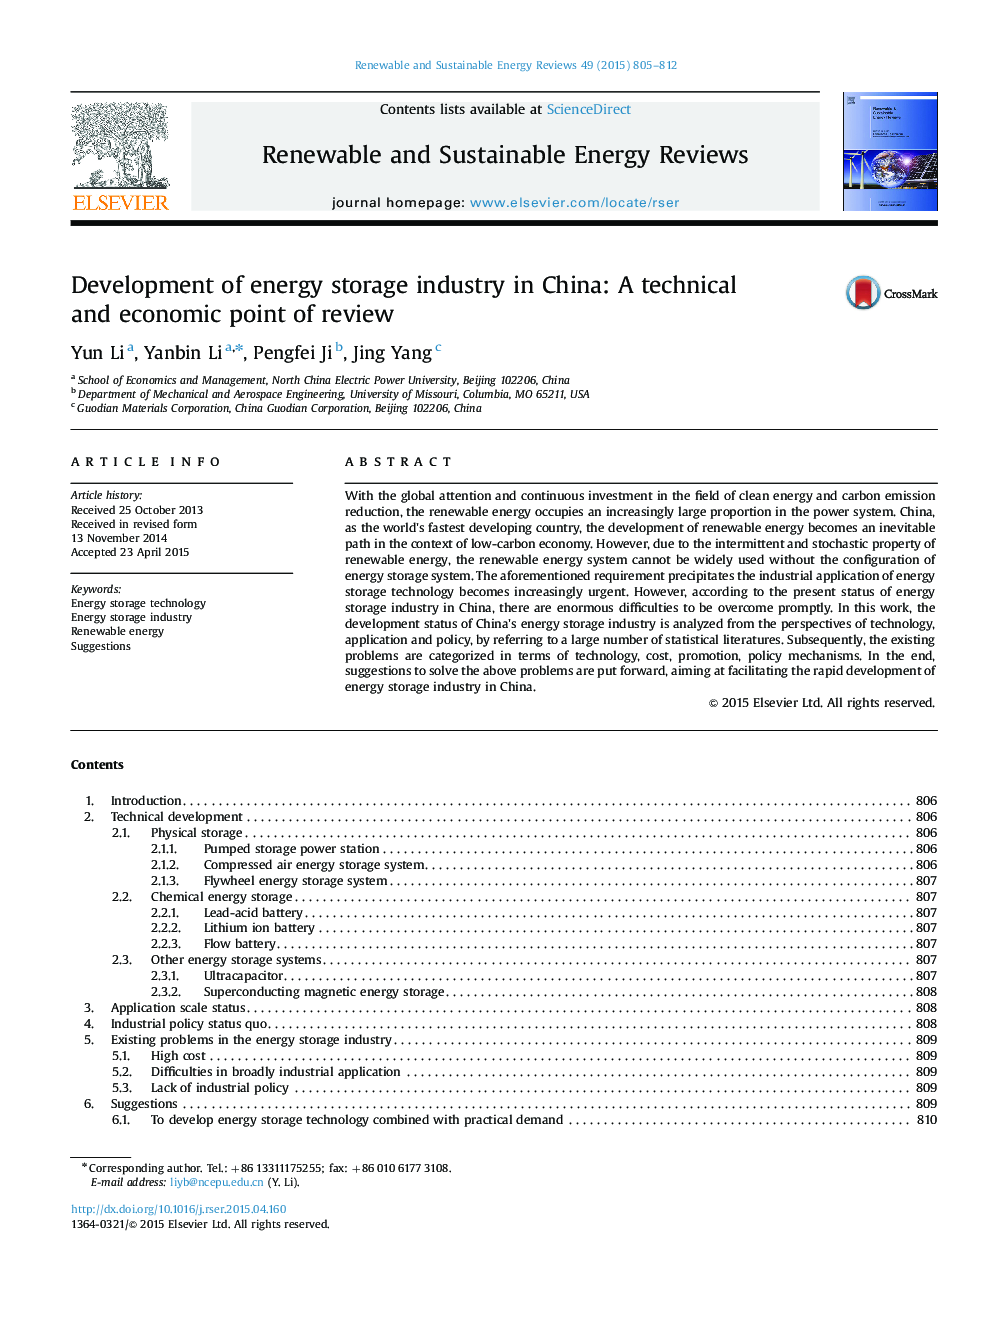 Development of energy storage industry in China: A technical and economic point of review